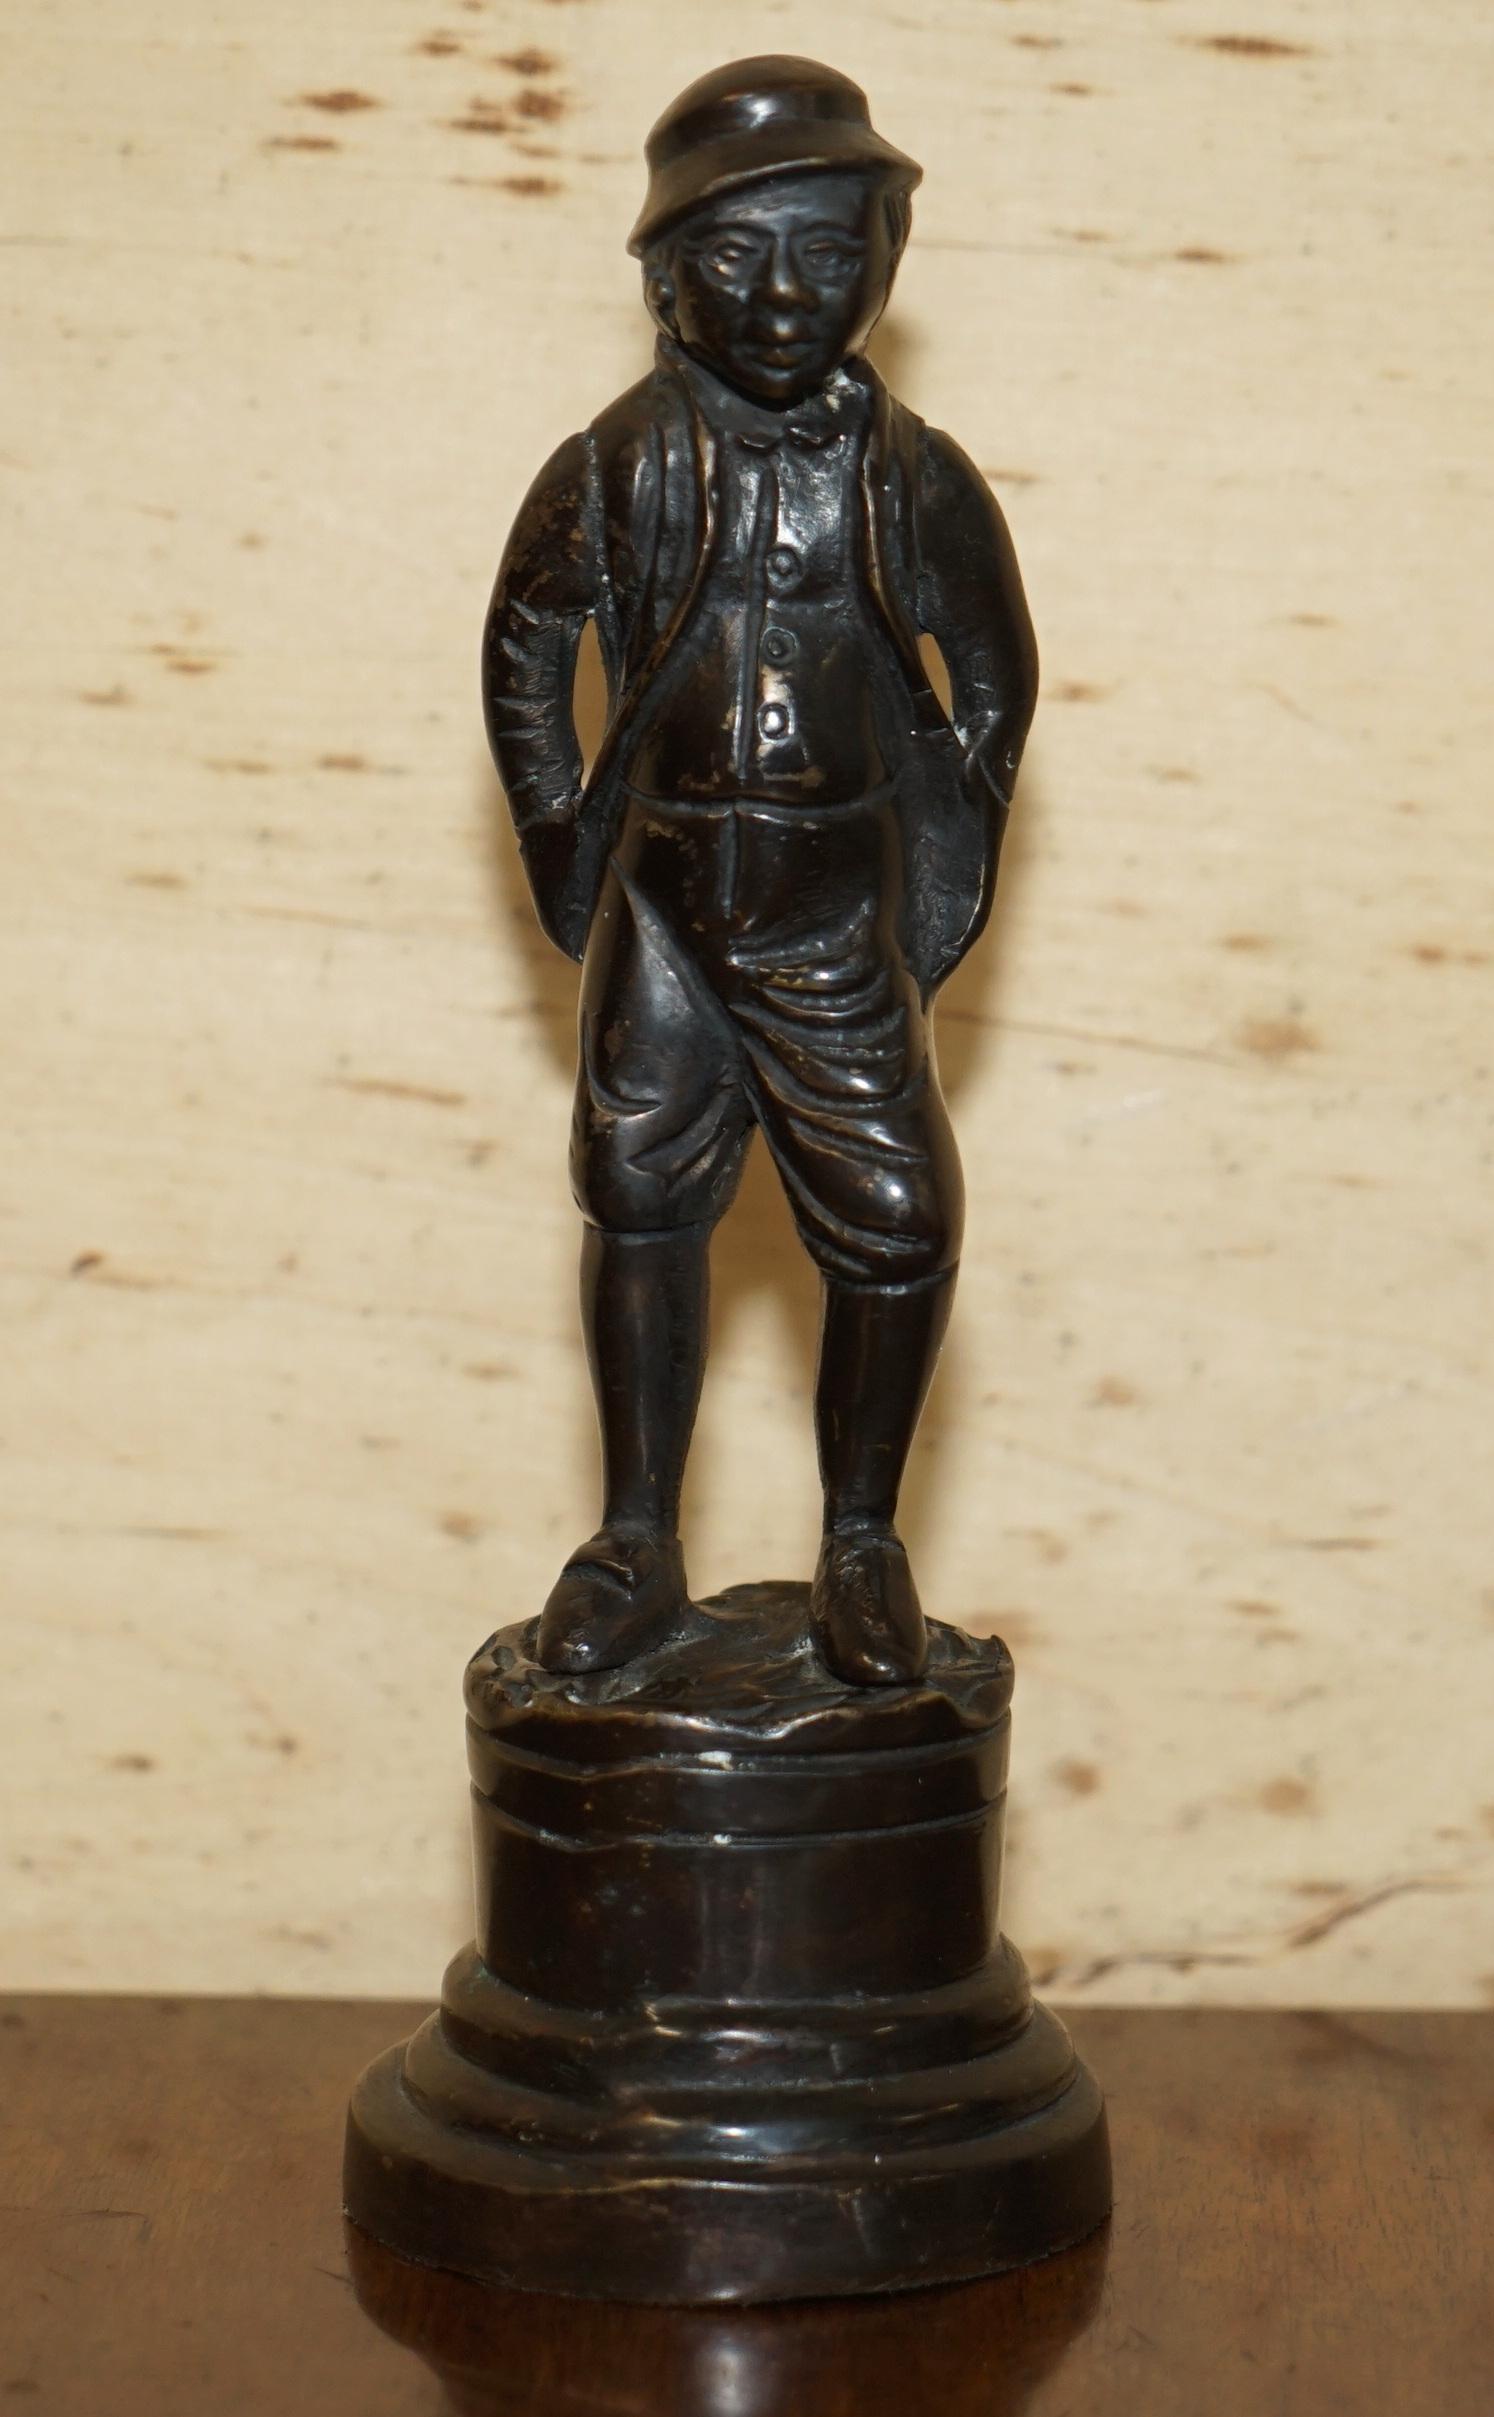 We are delighted to offer for sale this lovely 21cm tall Victorian Dandy bronze statue with a nice patina.

A very nice piece, I bought this around 20 years ago from a little antiques shop in Wimbledon, it was of some poet or other but I can't